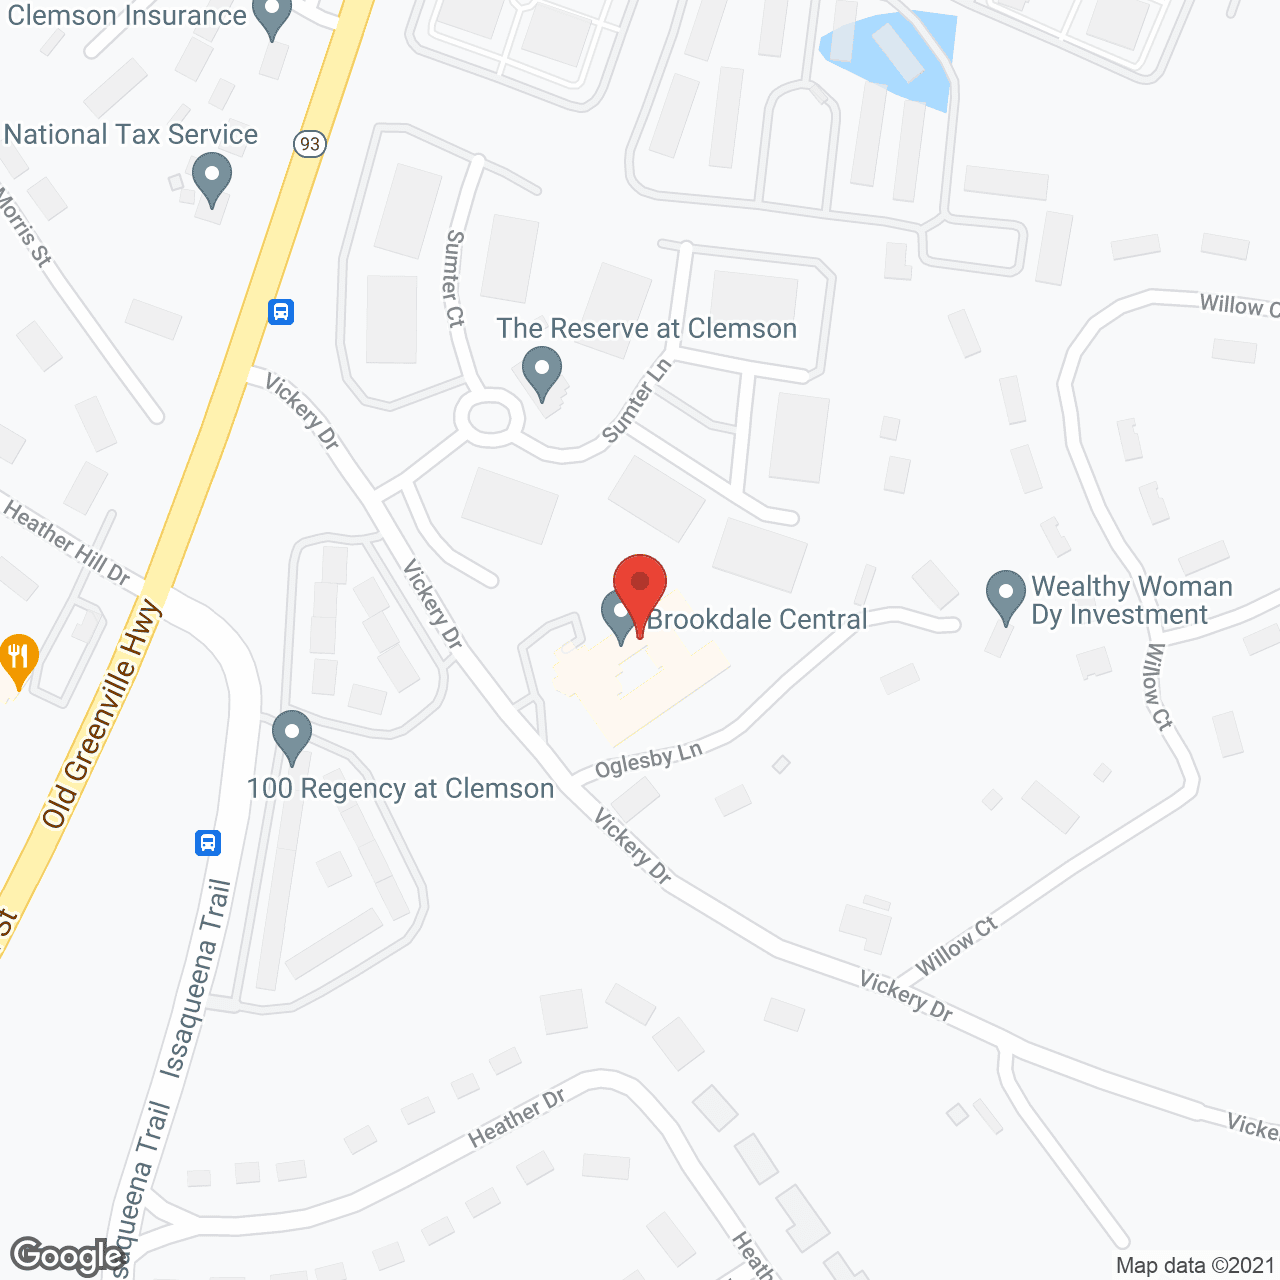 Vickery Parke Assisted Living in google map